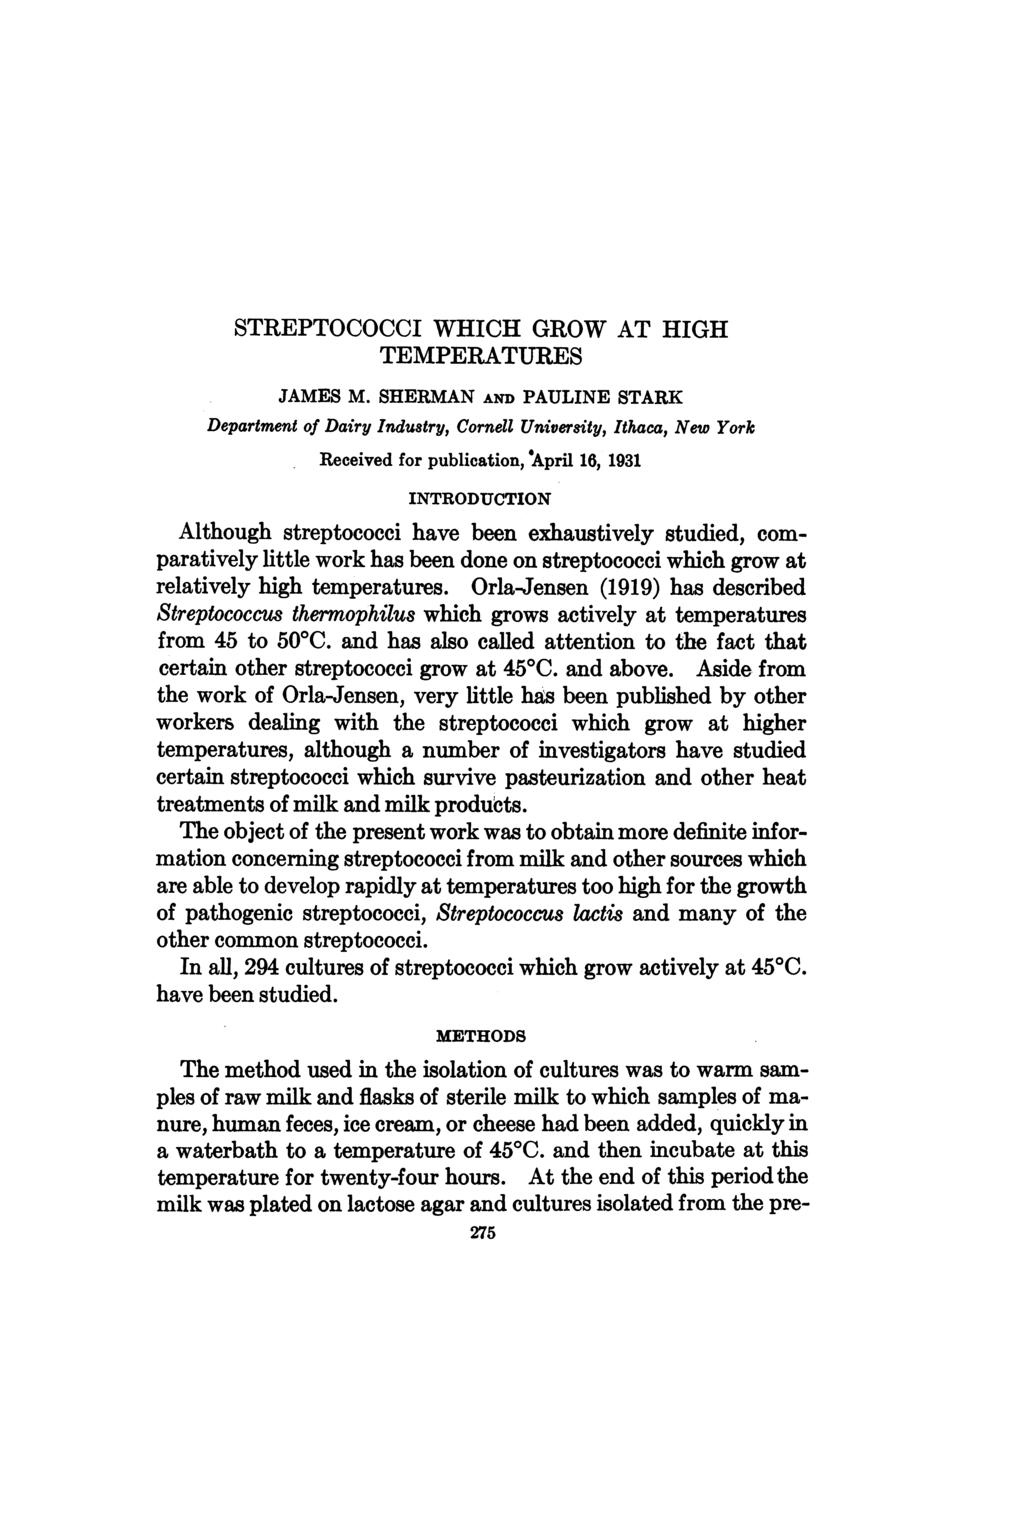 STREPTOCOCCI WHICH GROW AT HIGH TEMPERATURES Department of Dairy Industry, Cornell University, Ithaca, New York Received for publication, "April 16, 1931 INTRODUCTION Although streptococci have been